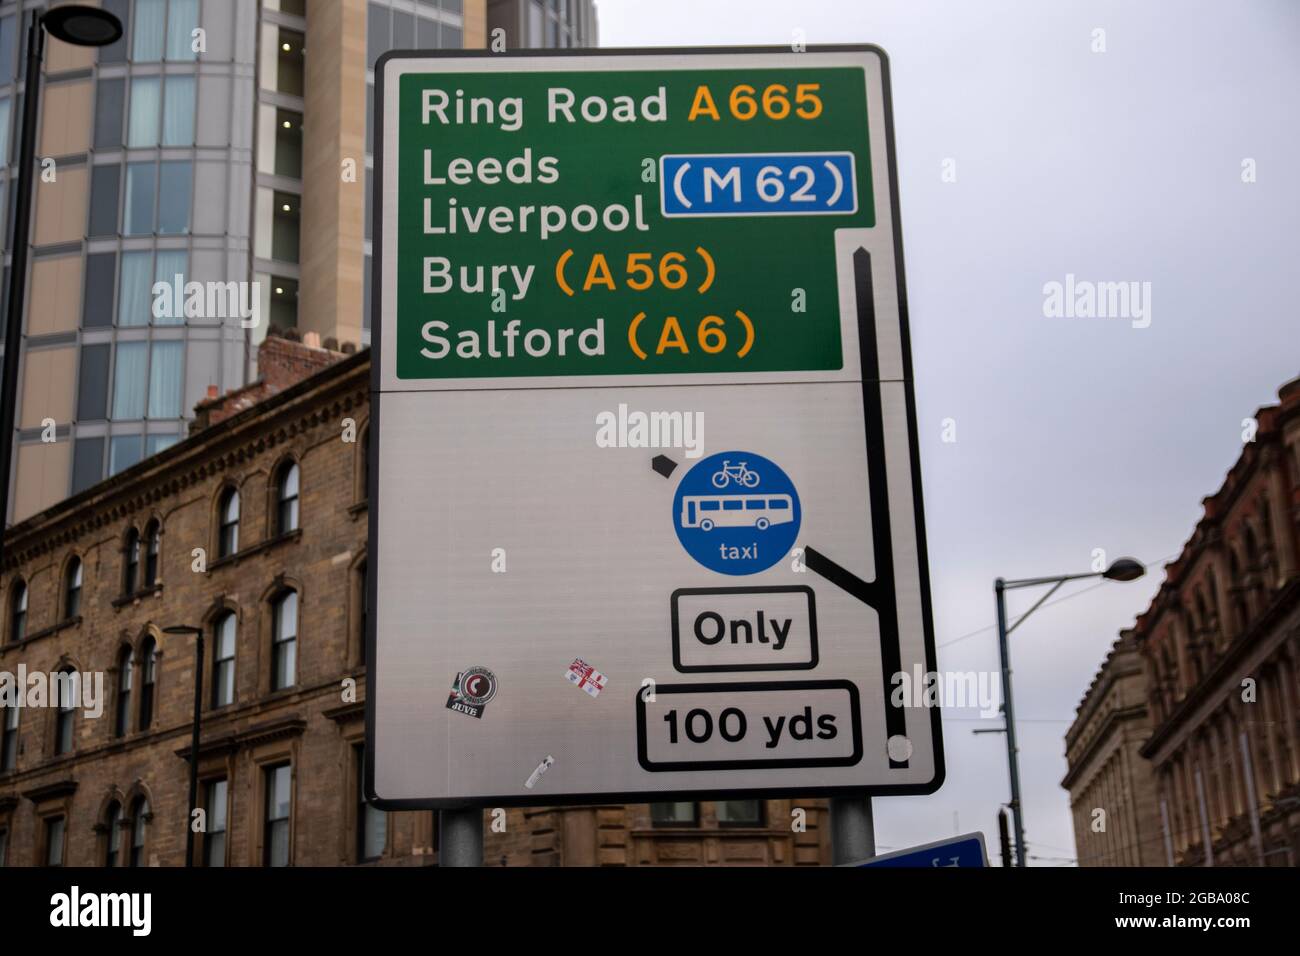 Direction Sign At Manchester England 7-12-2019 Stock Photo